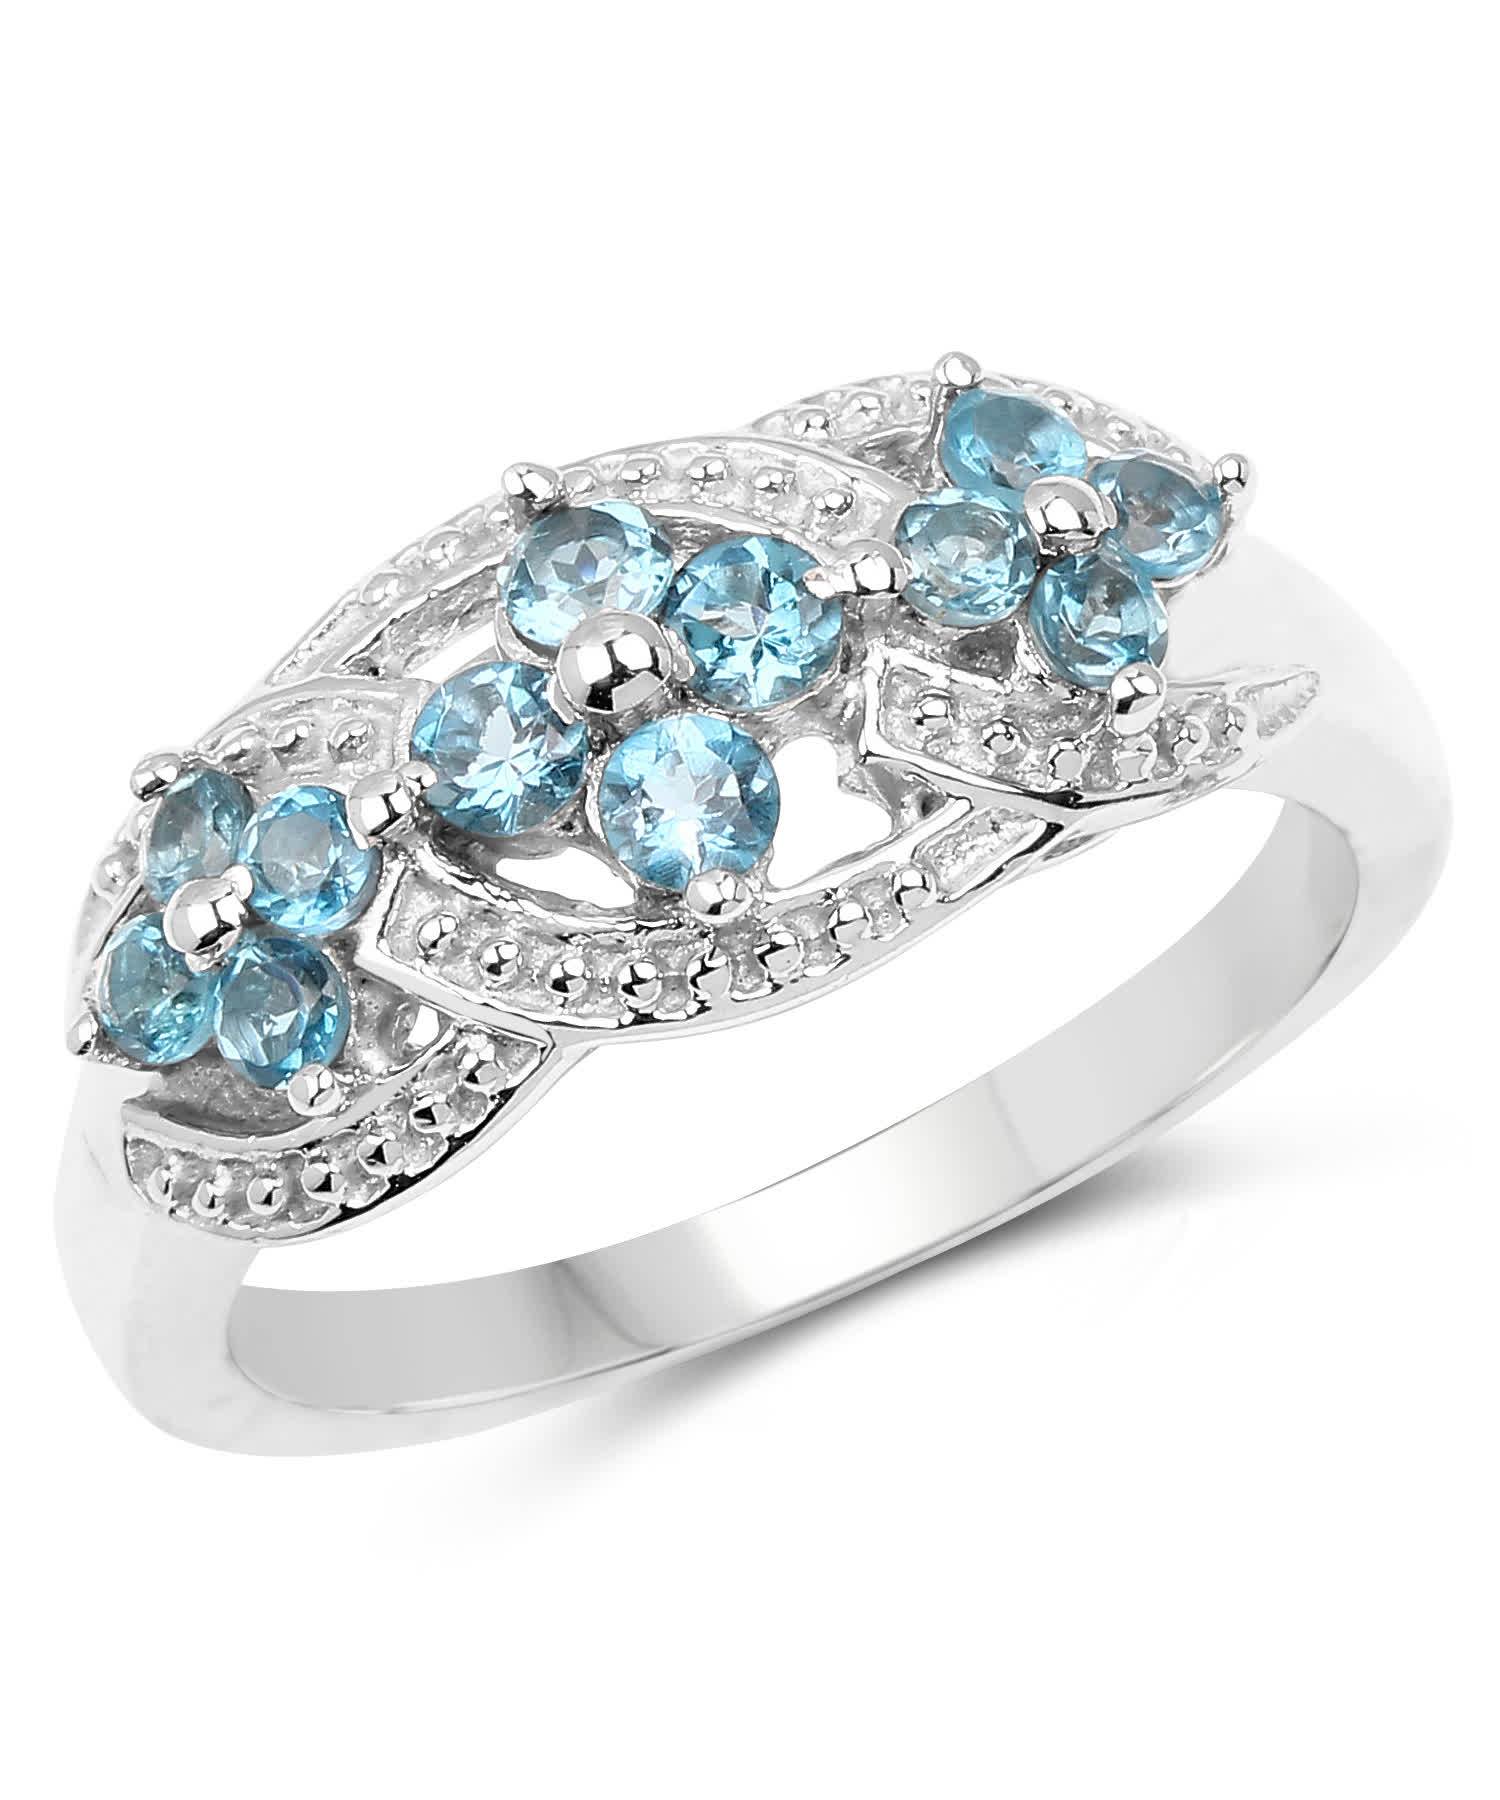 0.66ctw Natural London Blue Topaz Rhodium Plated 925 Sterling Silver Flower Ring View 1